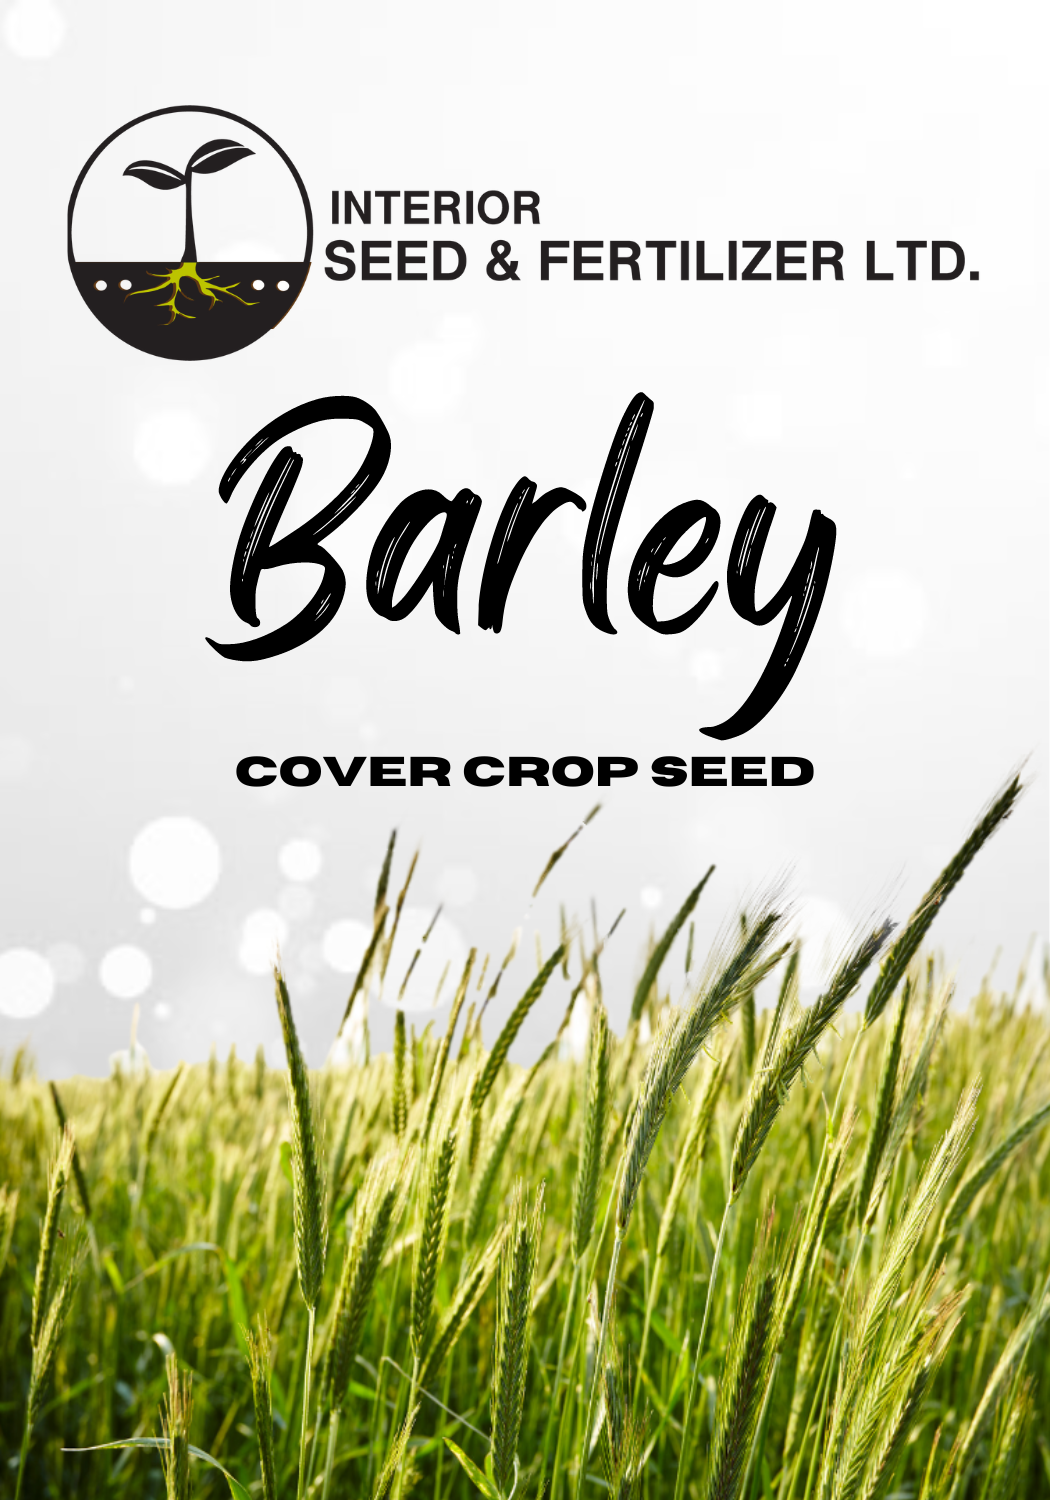 Barley Cover Crop Seed at Interior Seed and Fertilizer Garden Center Cranbrook, BC